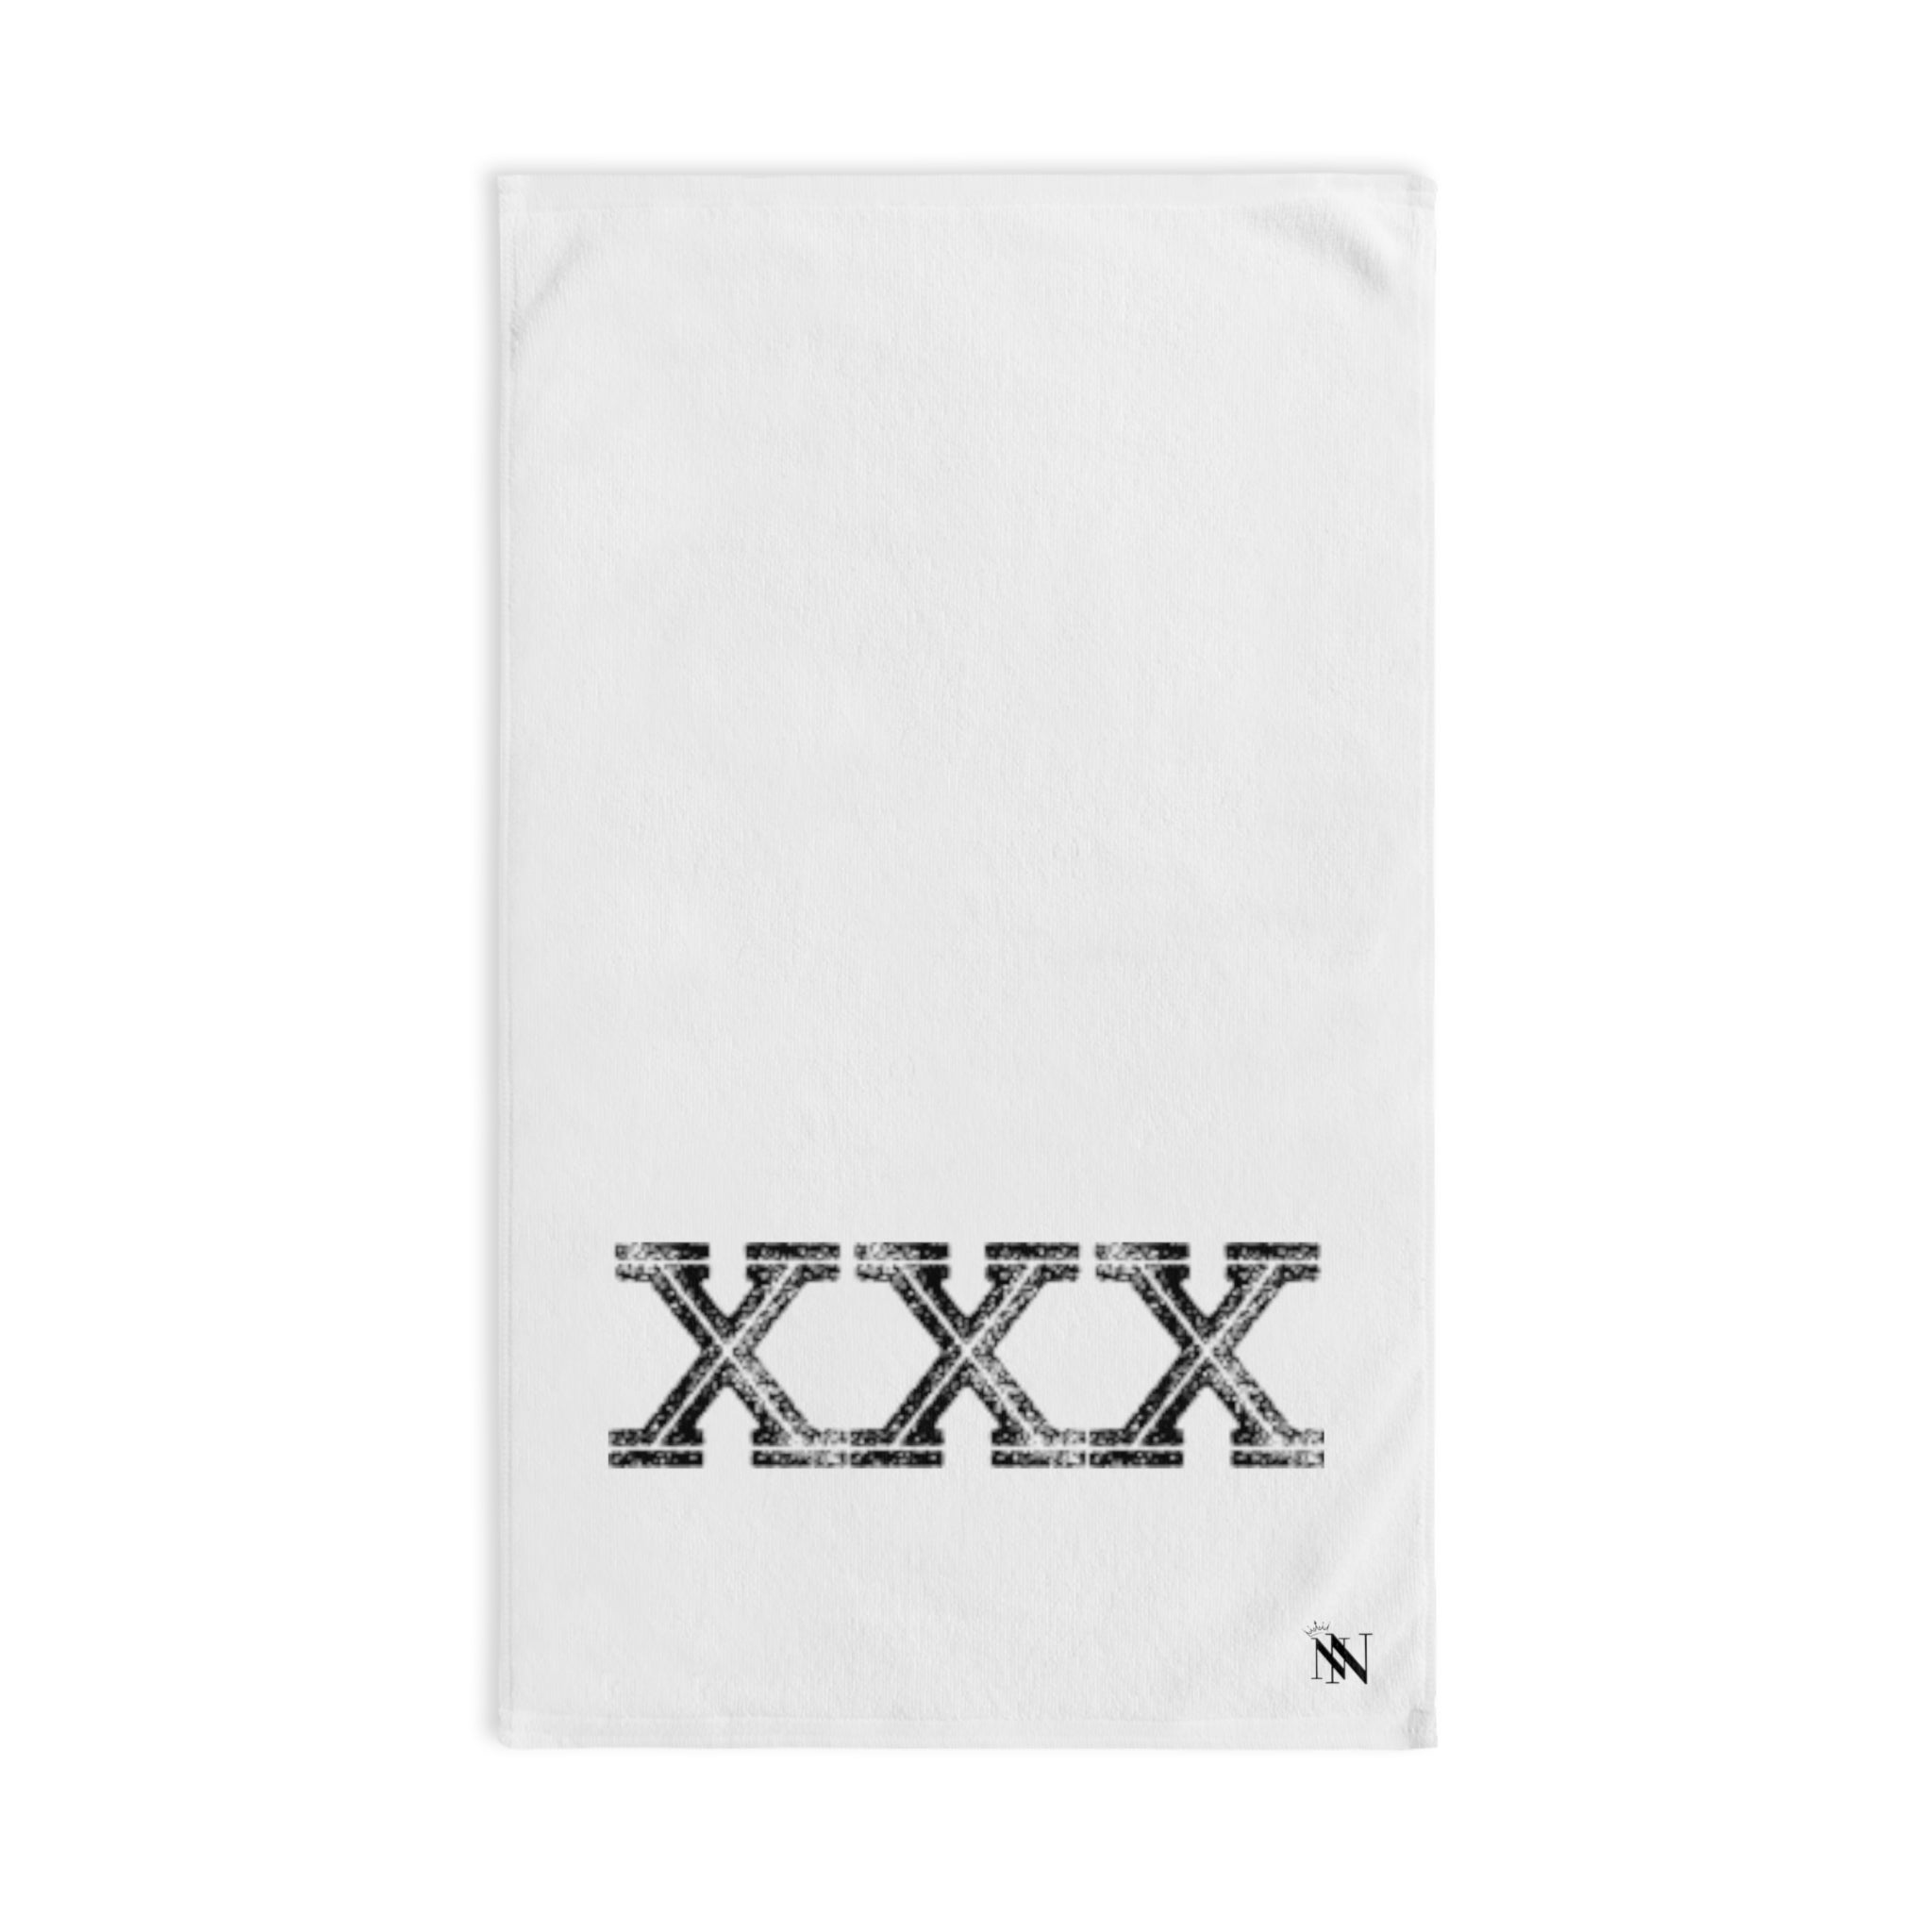 XXX Black White | Funny Gifts for Men - Gifts for Him - Birthday Gifts for Men, Him, Her, Husband, Boyfriend, Girlfriend, New Couple Gifts, Fathers & Valentines Day Gifts, Christmas Gifts NECTAR NAPKINS